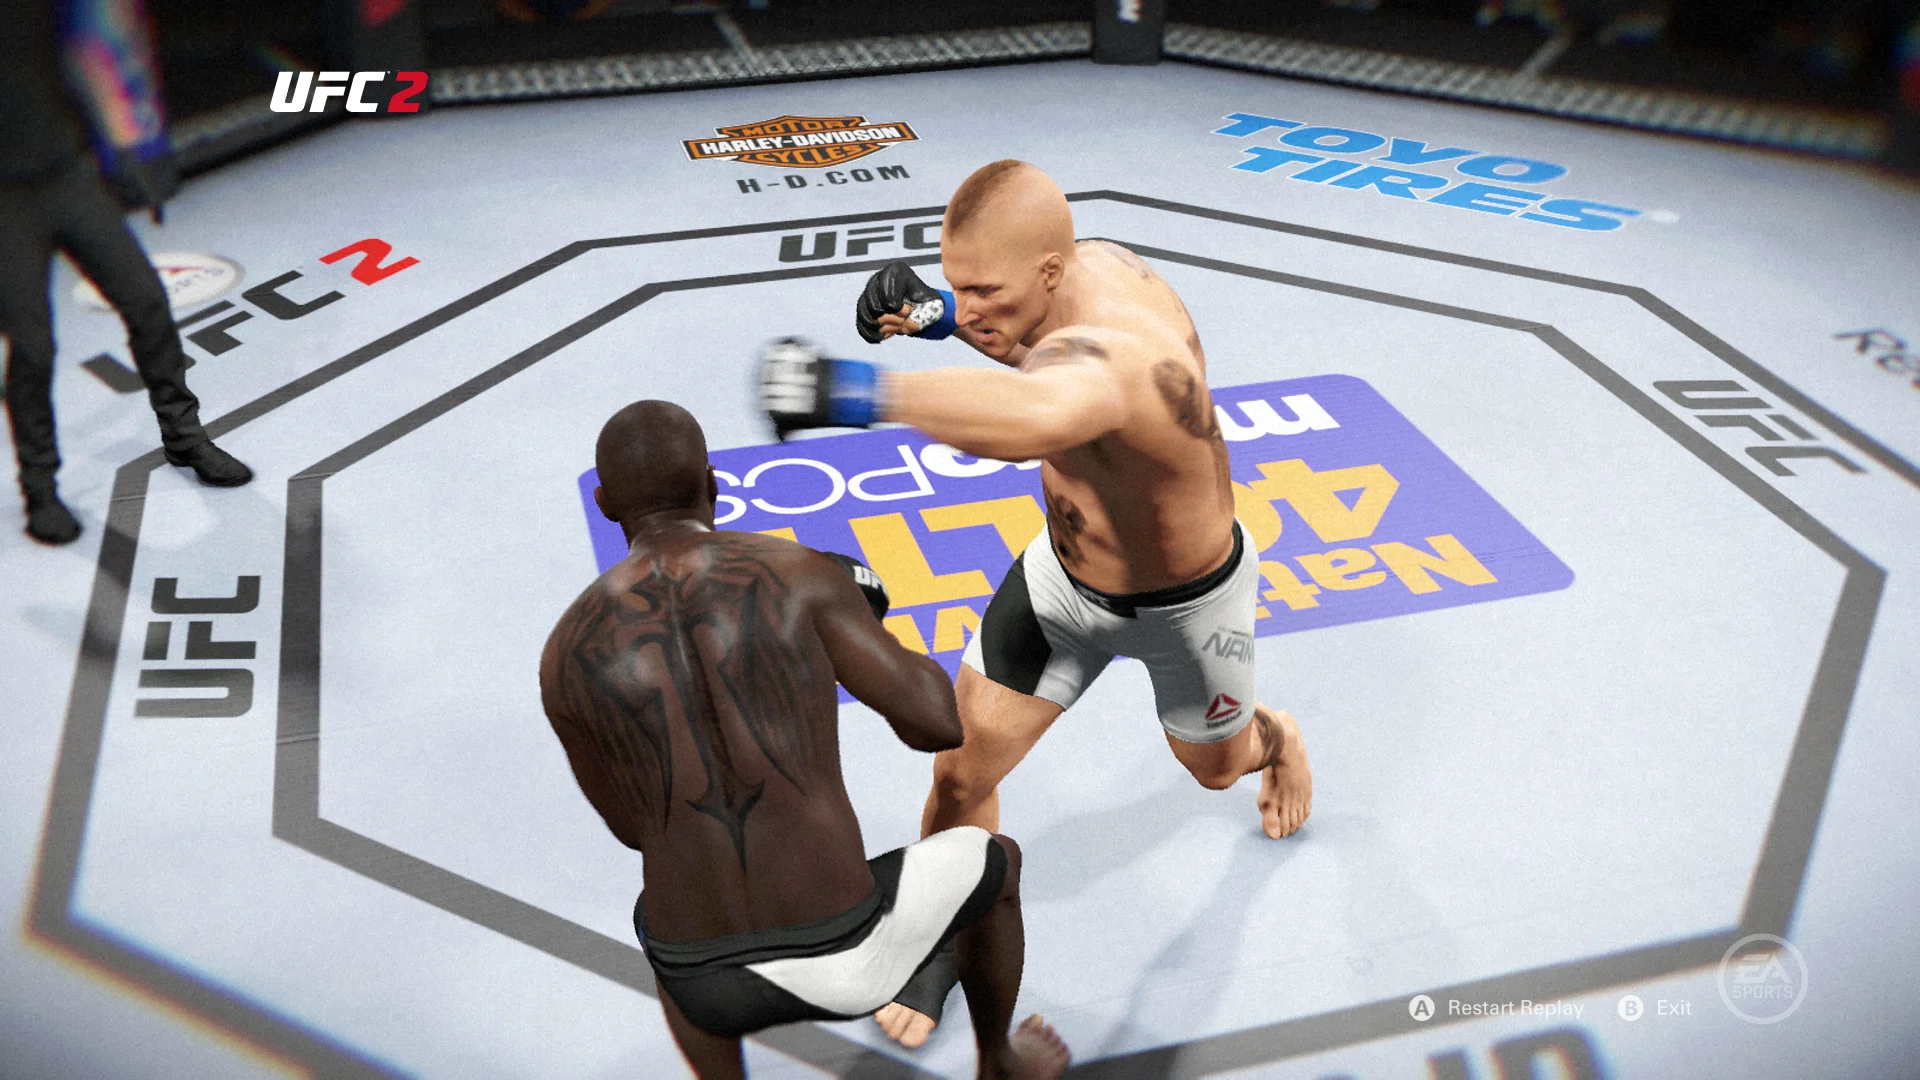 Åre Underholdning Måne EA Sports UFC 2': Punch button | The GATE